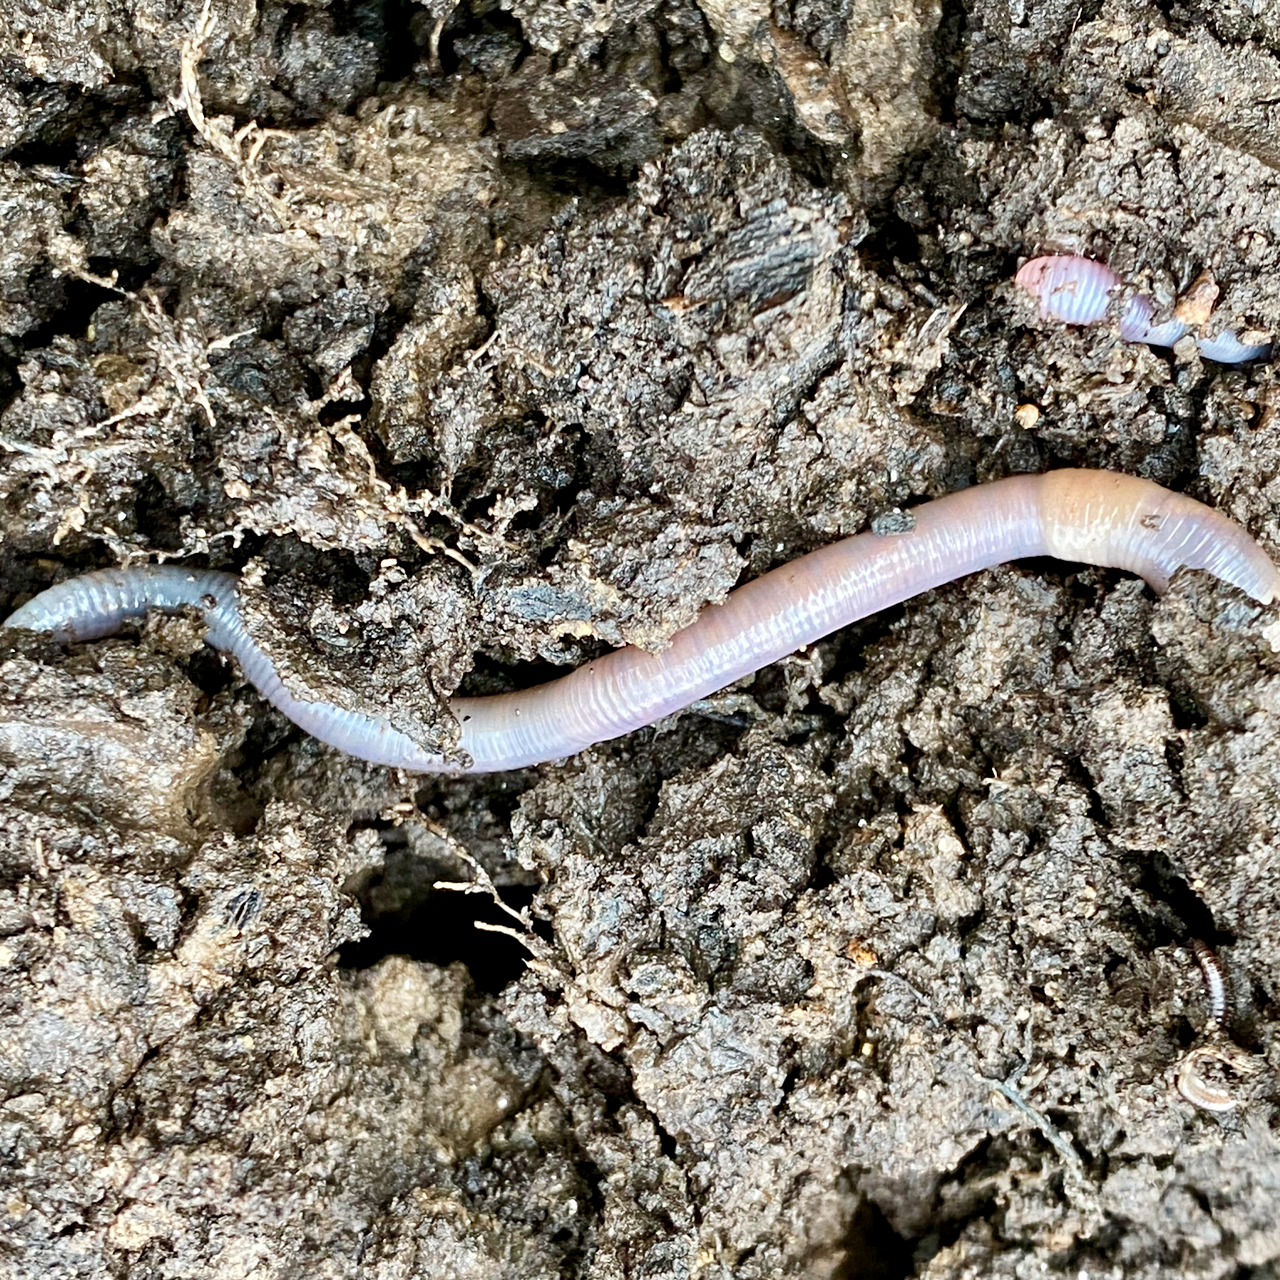 Earthworm at work